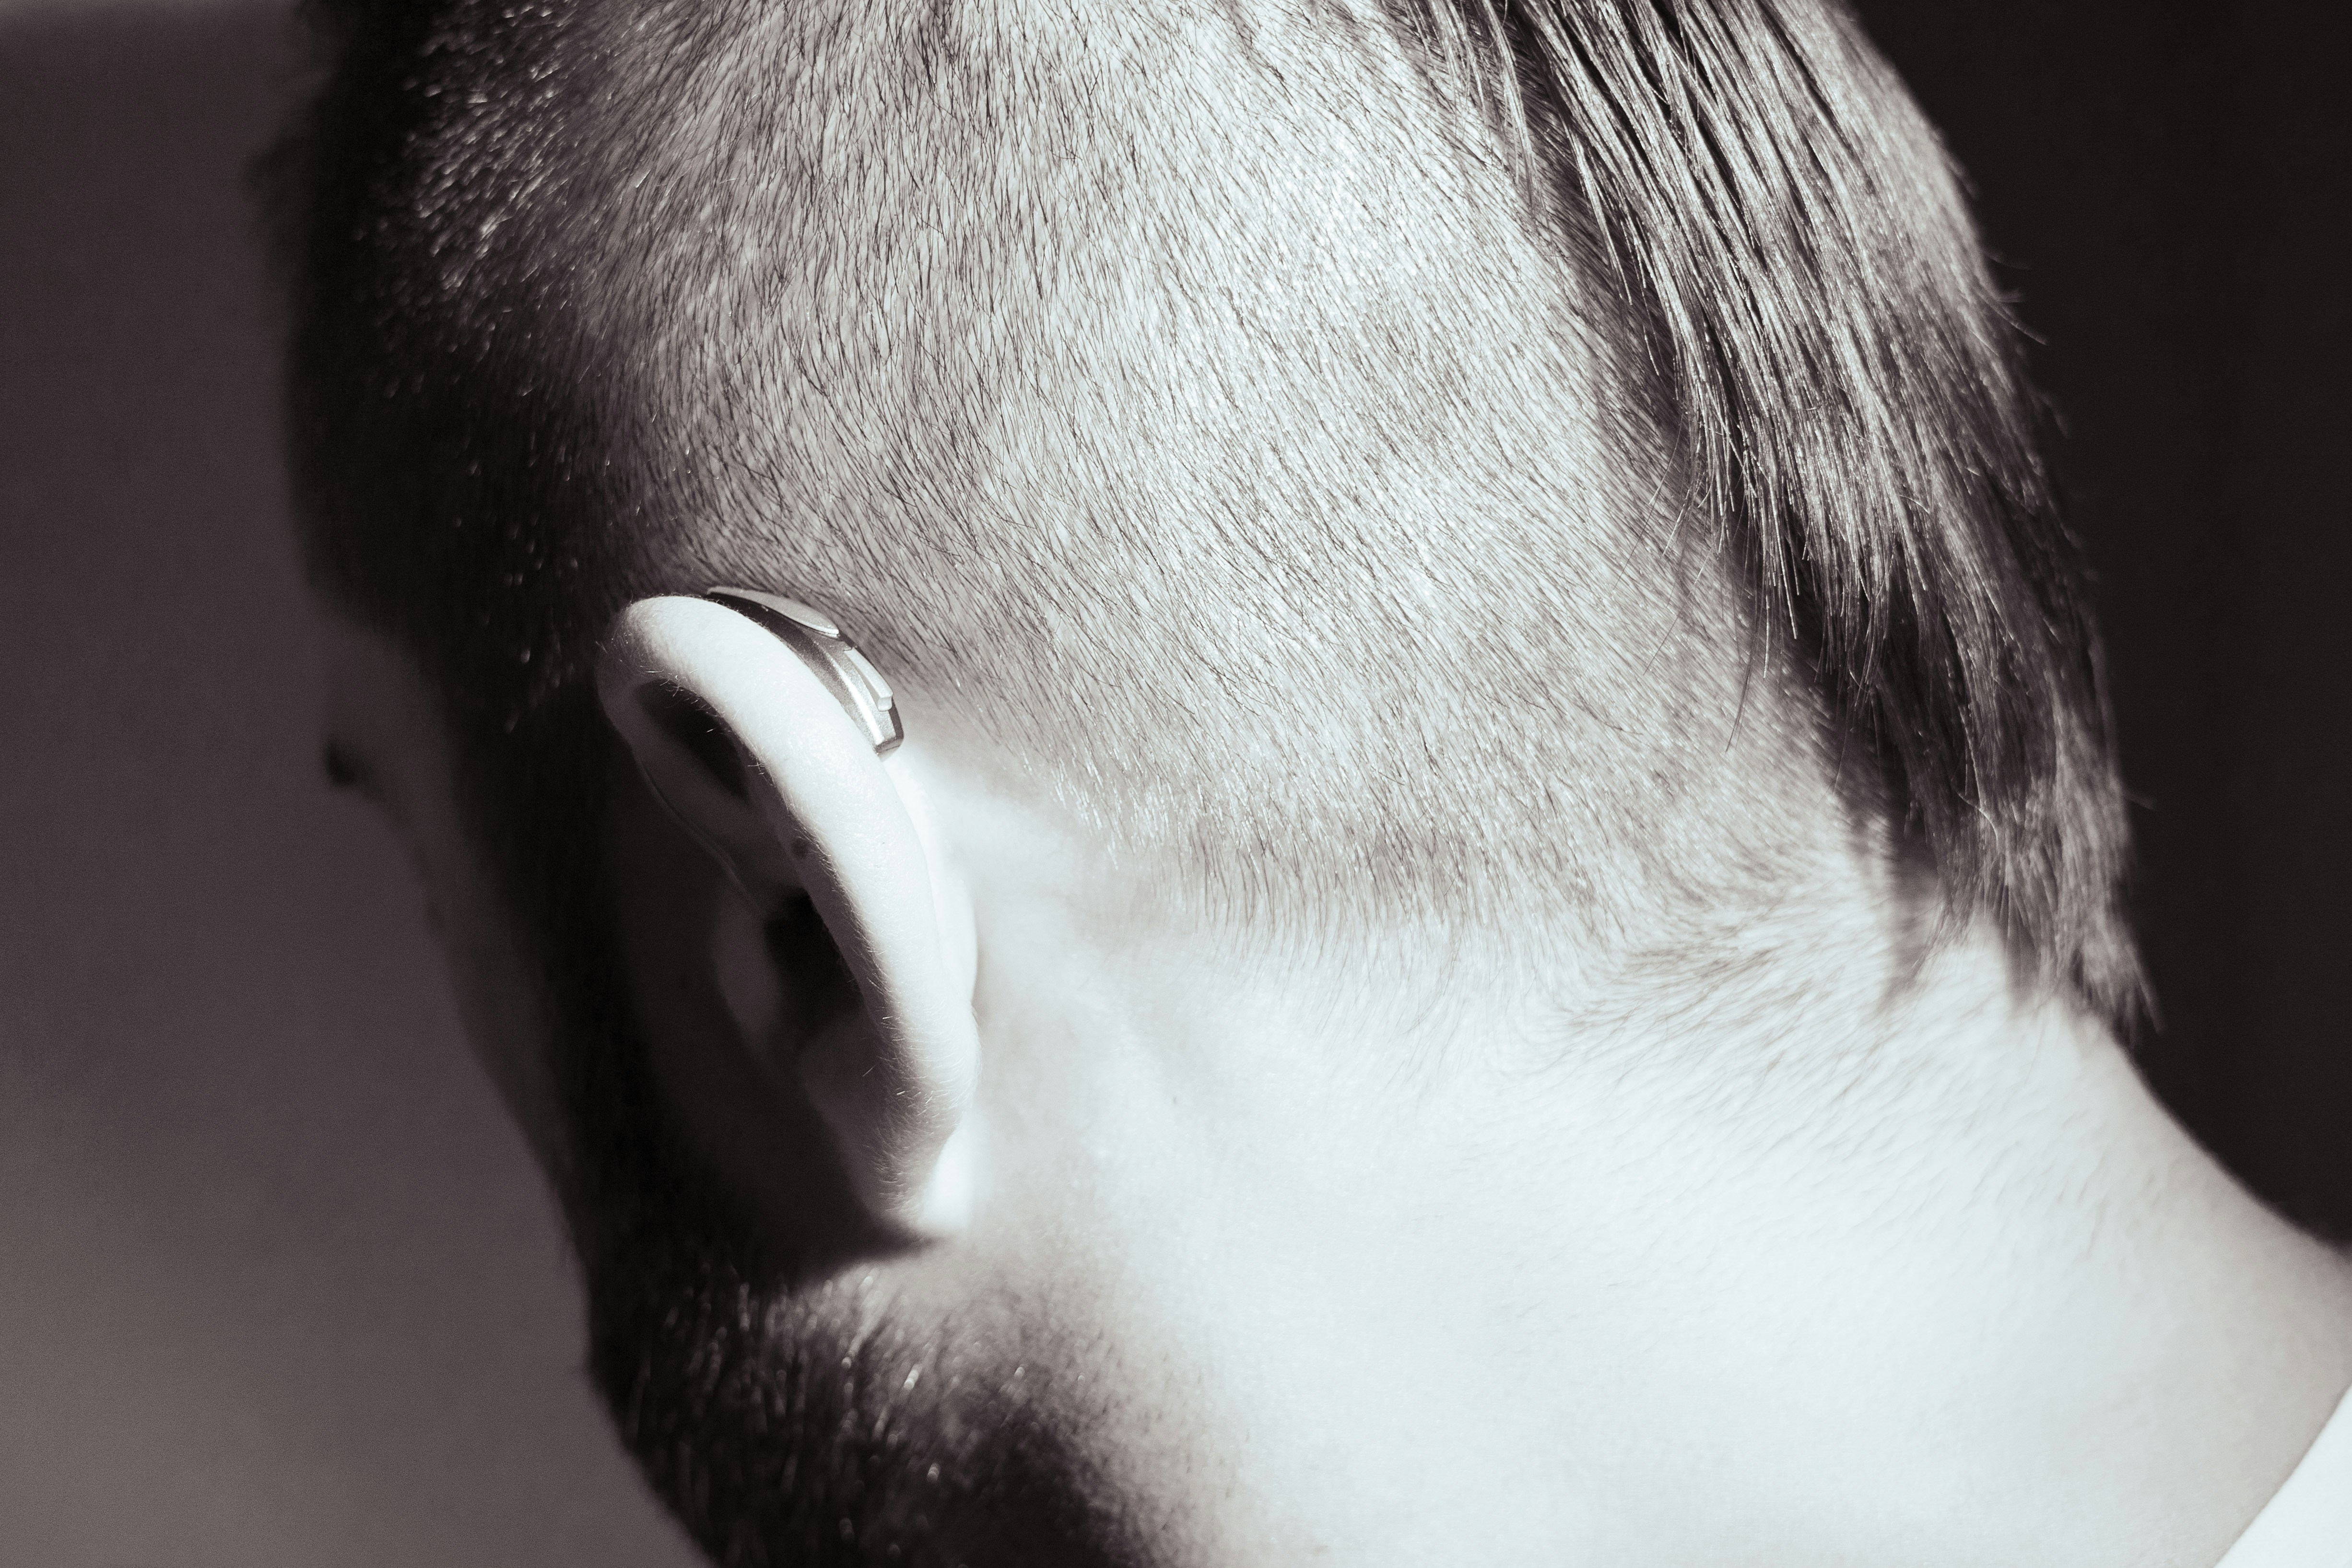 man with shaved hair style that exposes a small hearing aid behind his left ear